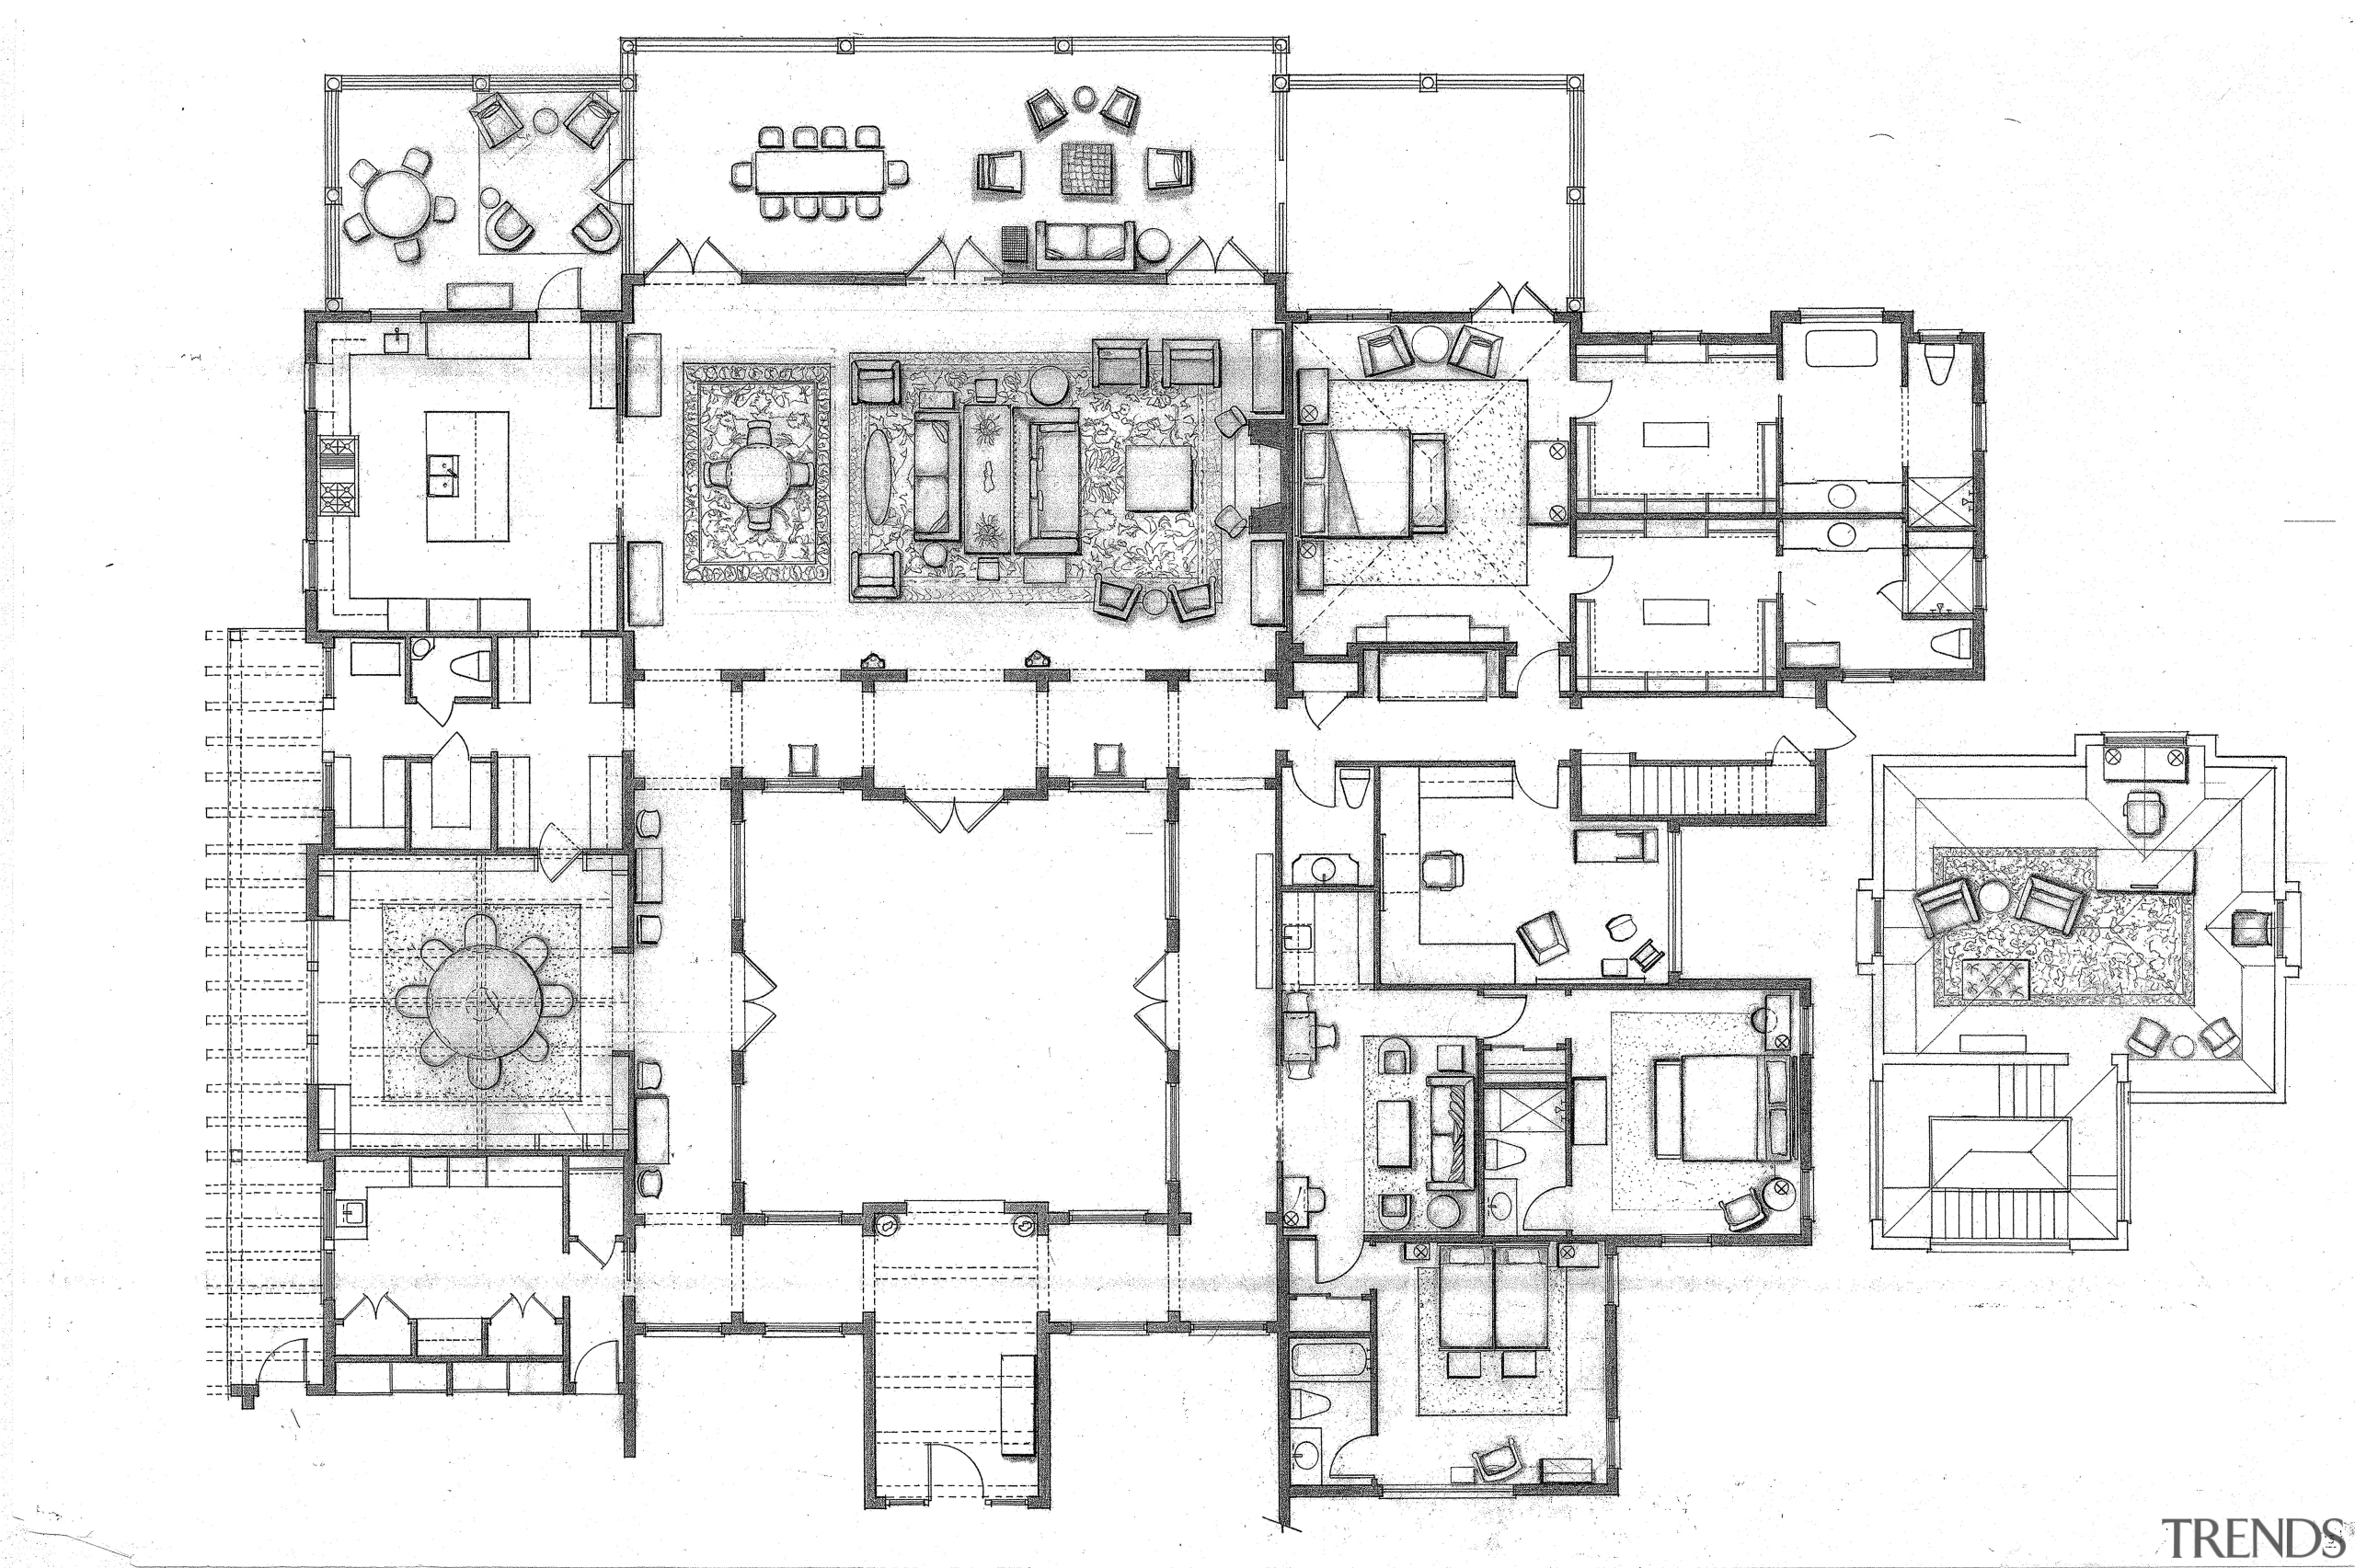 Spanish style interior - Spanish style interior - architecture, area, artwork, design, diagram, drawing, floor plan, home, line, line art, plan, product design, residential area, schematic, structure, technical drawing, white